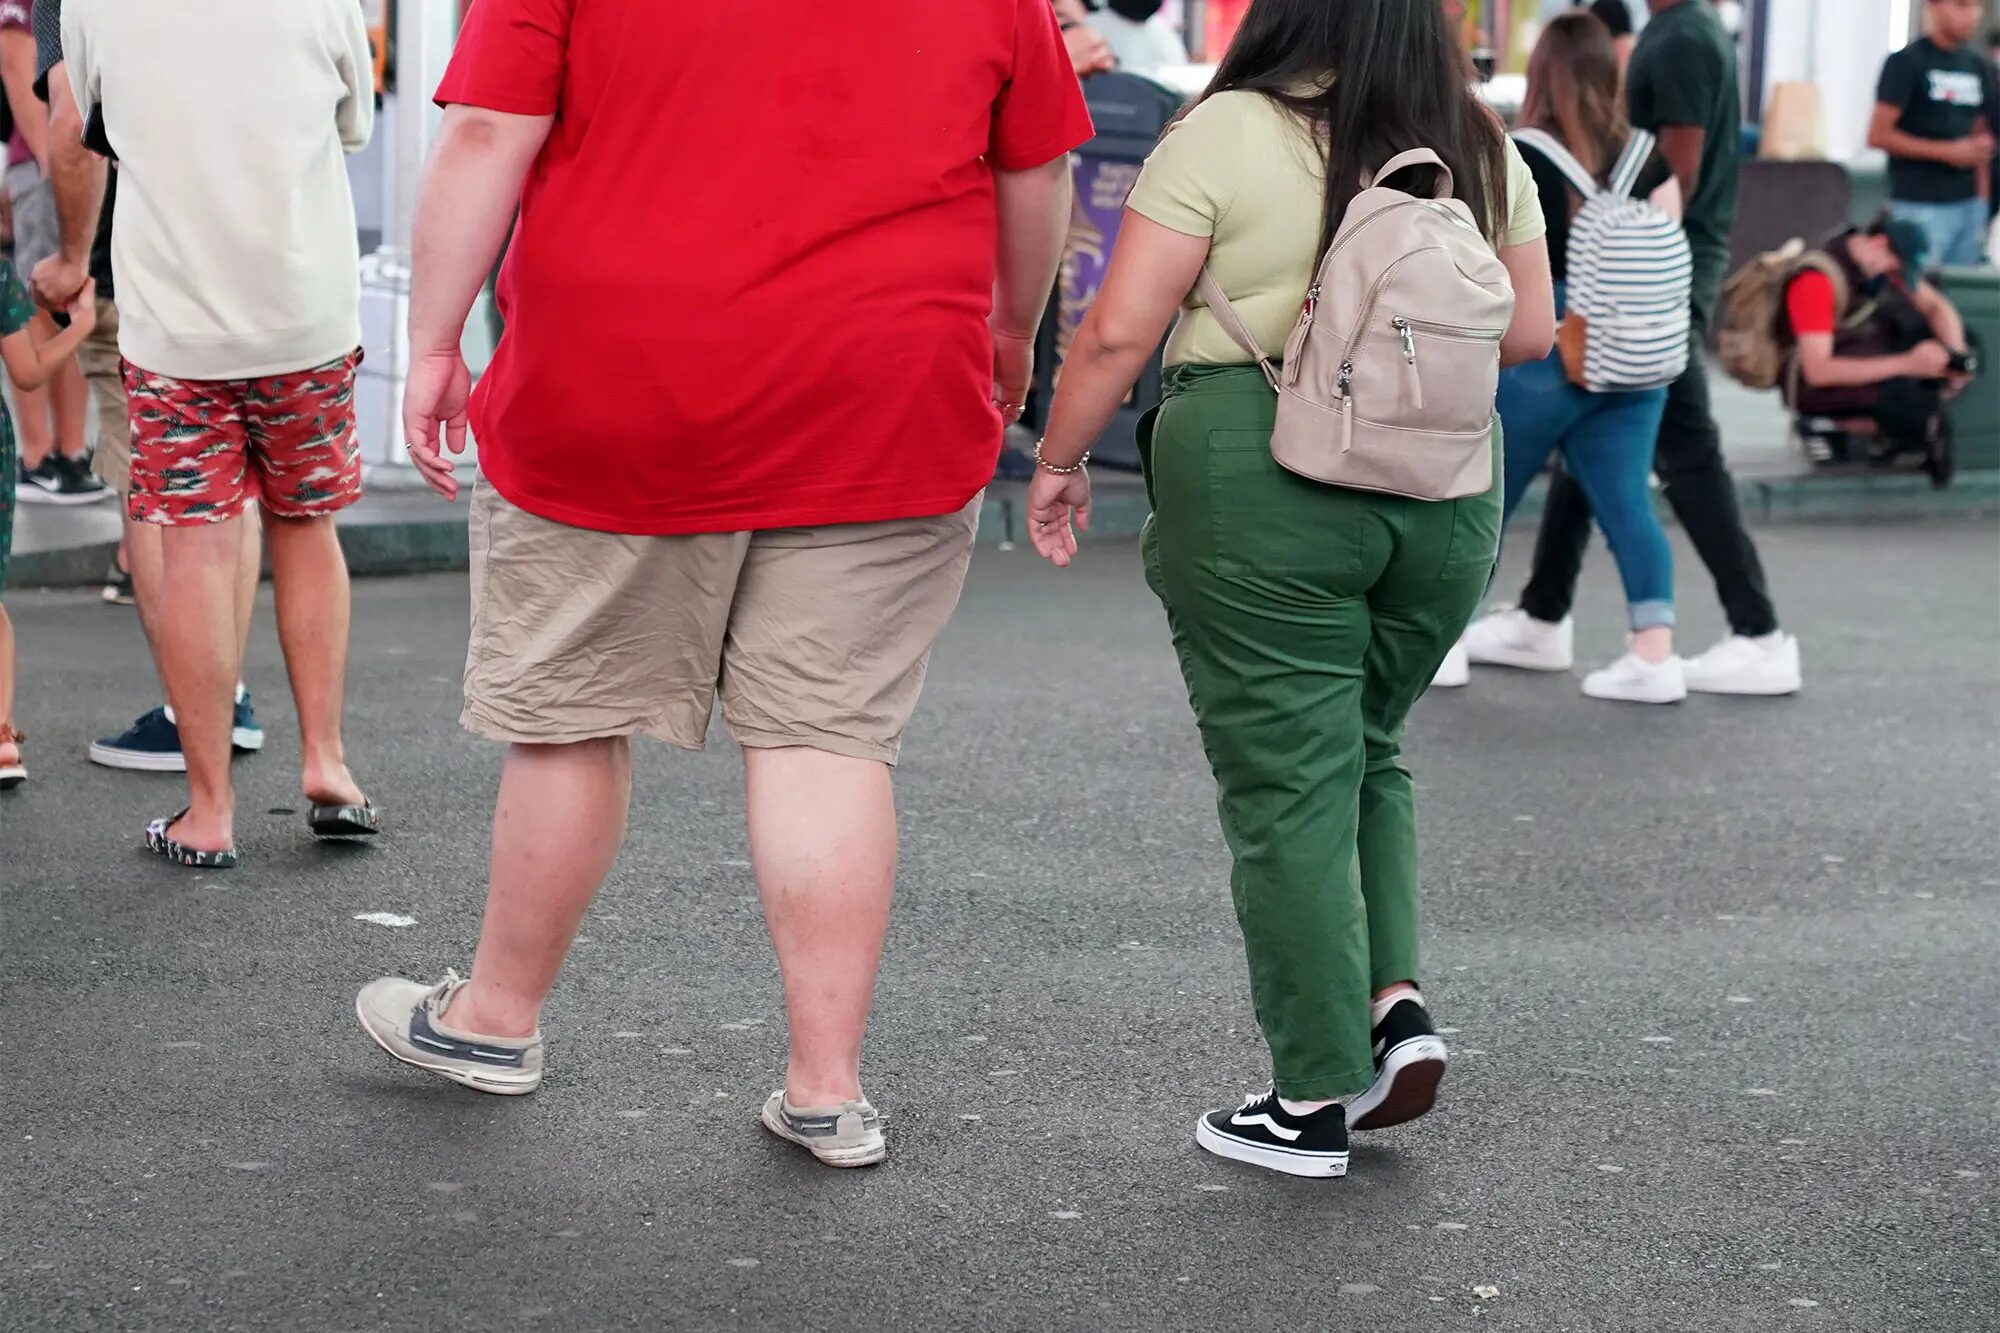 obese americans